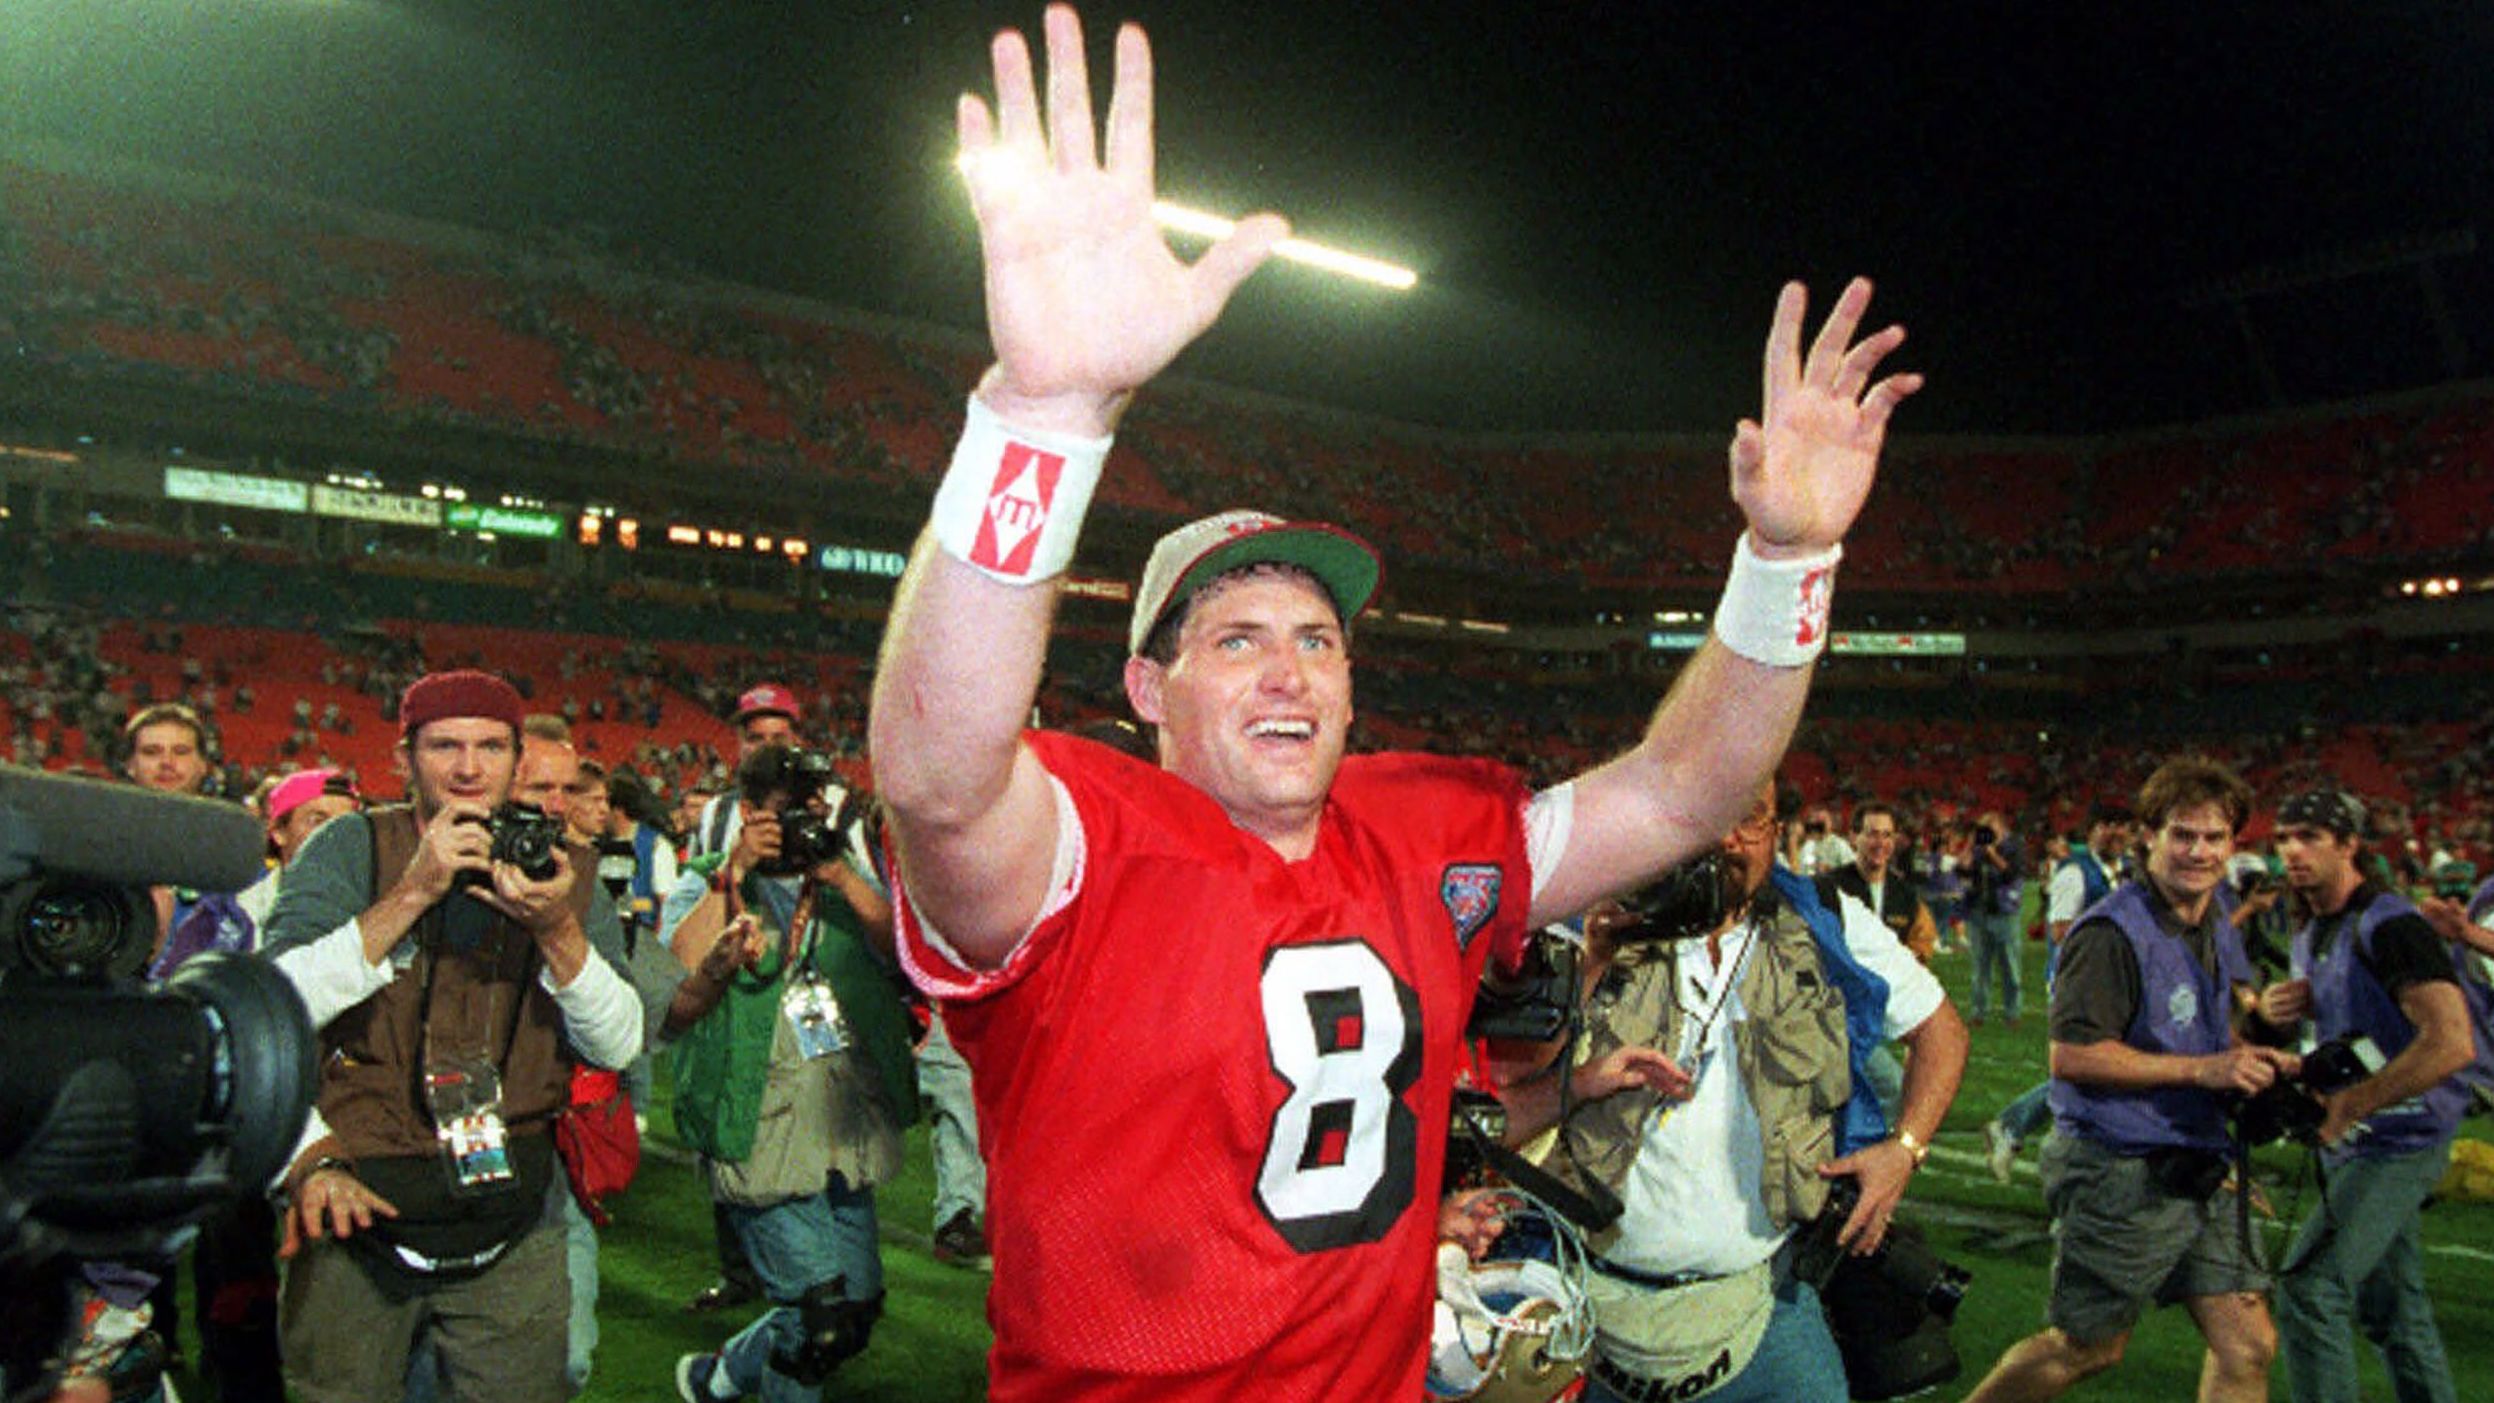 <strong>Super Bowl XXIX (1995):</strong> After serving as Joe Montana's backup for several years, San Francisco quarterback Steve Young got his moment to shine in 1995. Young threw for a Super Bowl-record six touchdowns as the 49ers defeated the San Diego Chargers 49-26.